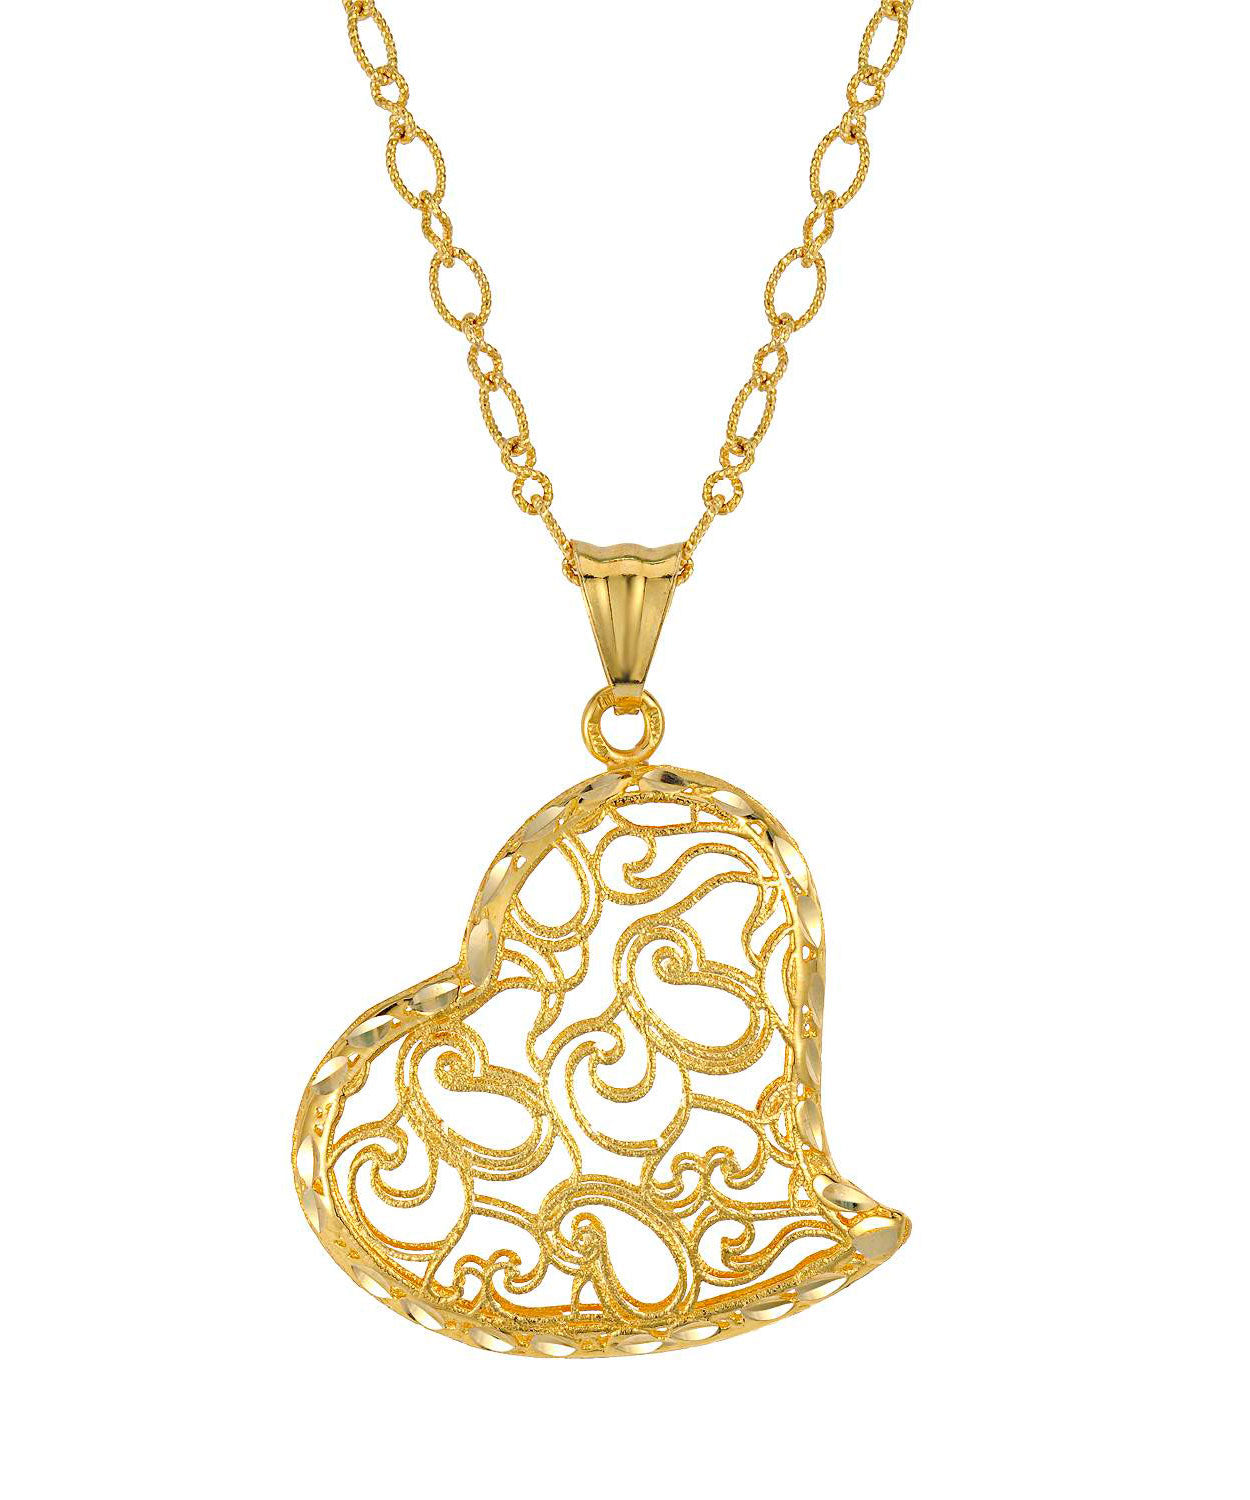 Patterns of Love Collection 14k Gold Heart Pendant With Chain - Made in Italy View 1